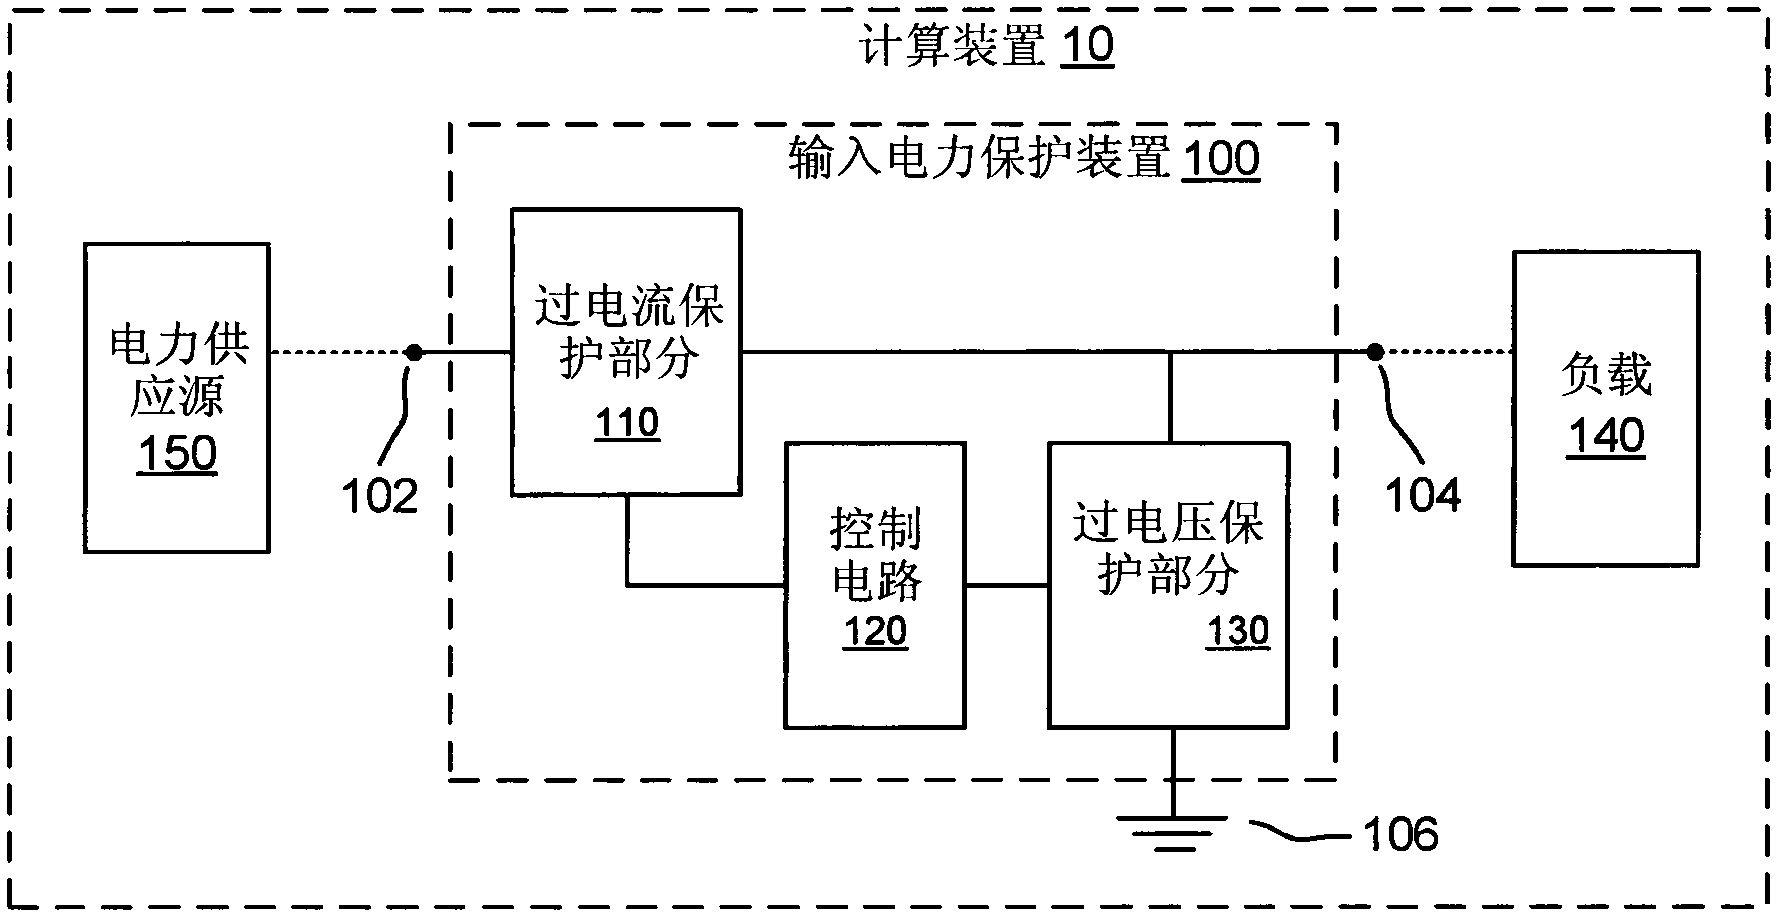 Integrated overdrive and overvoltage protection device